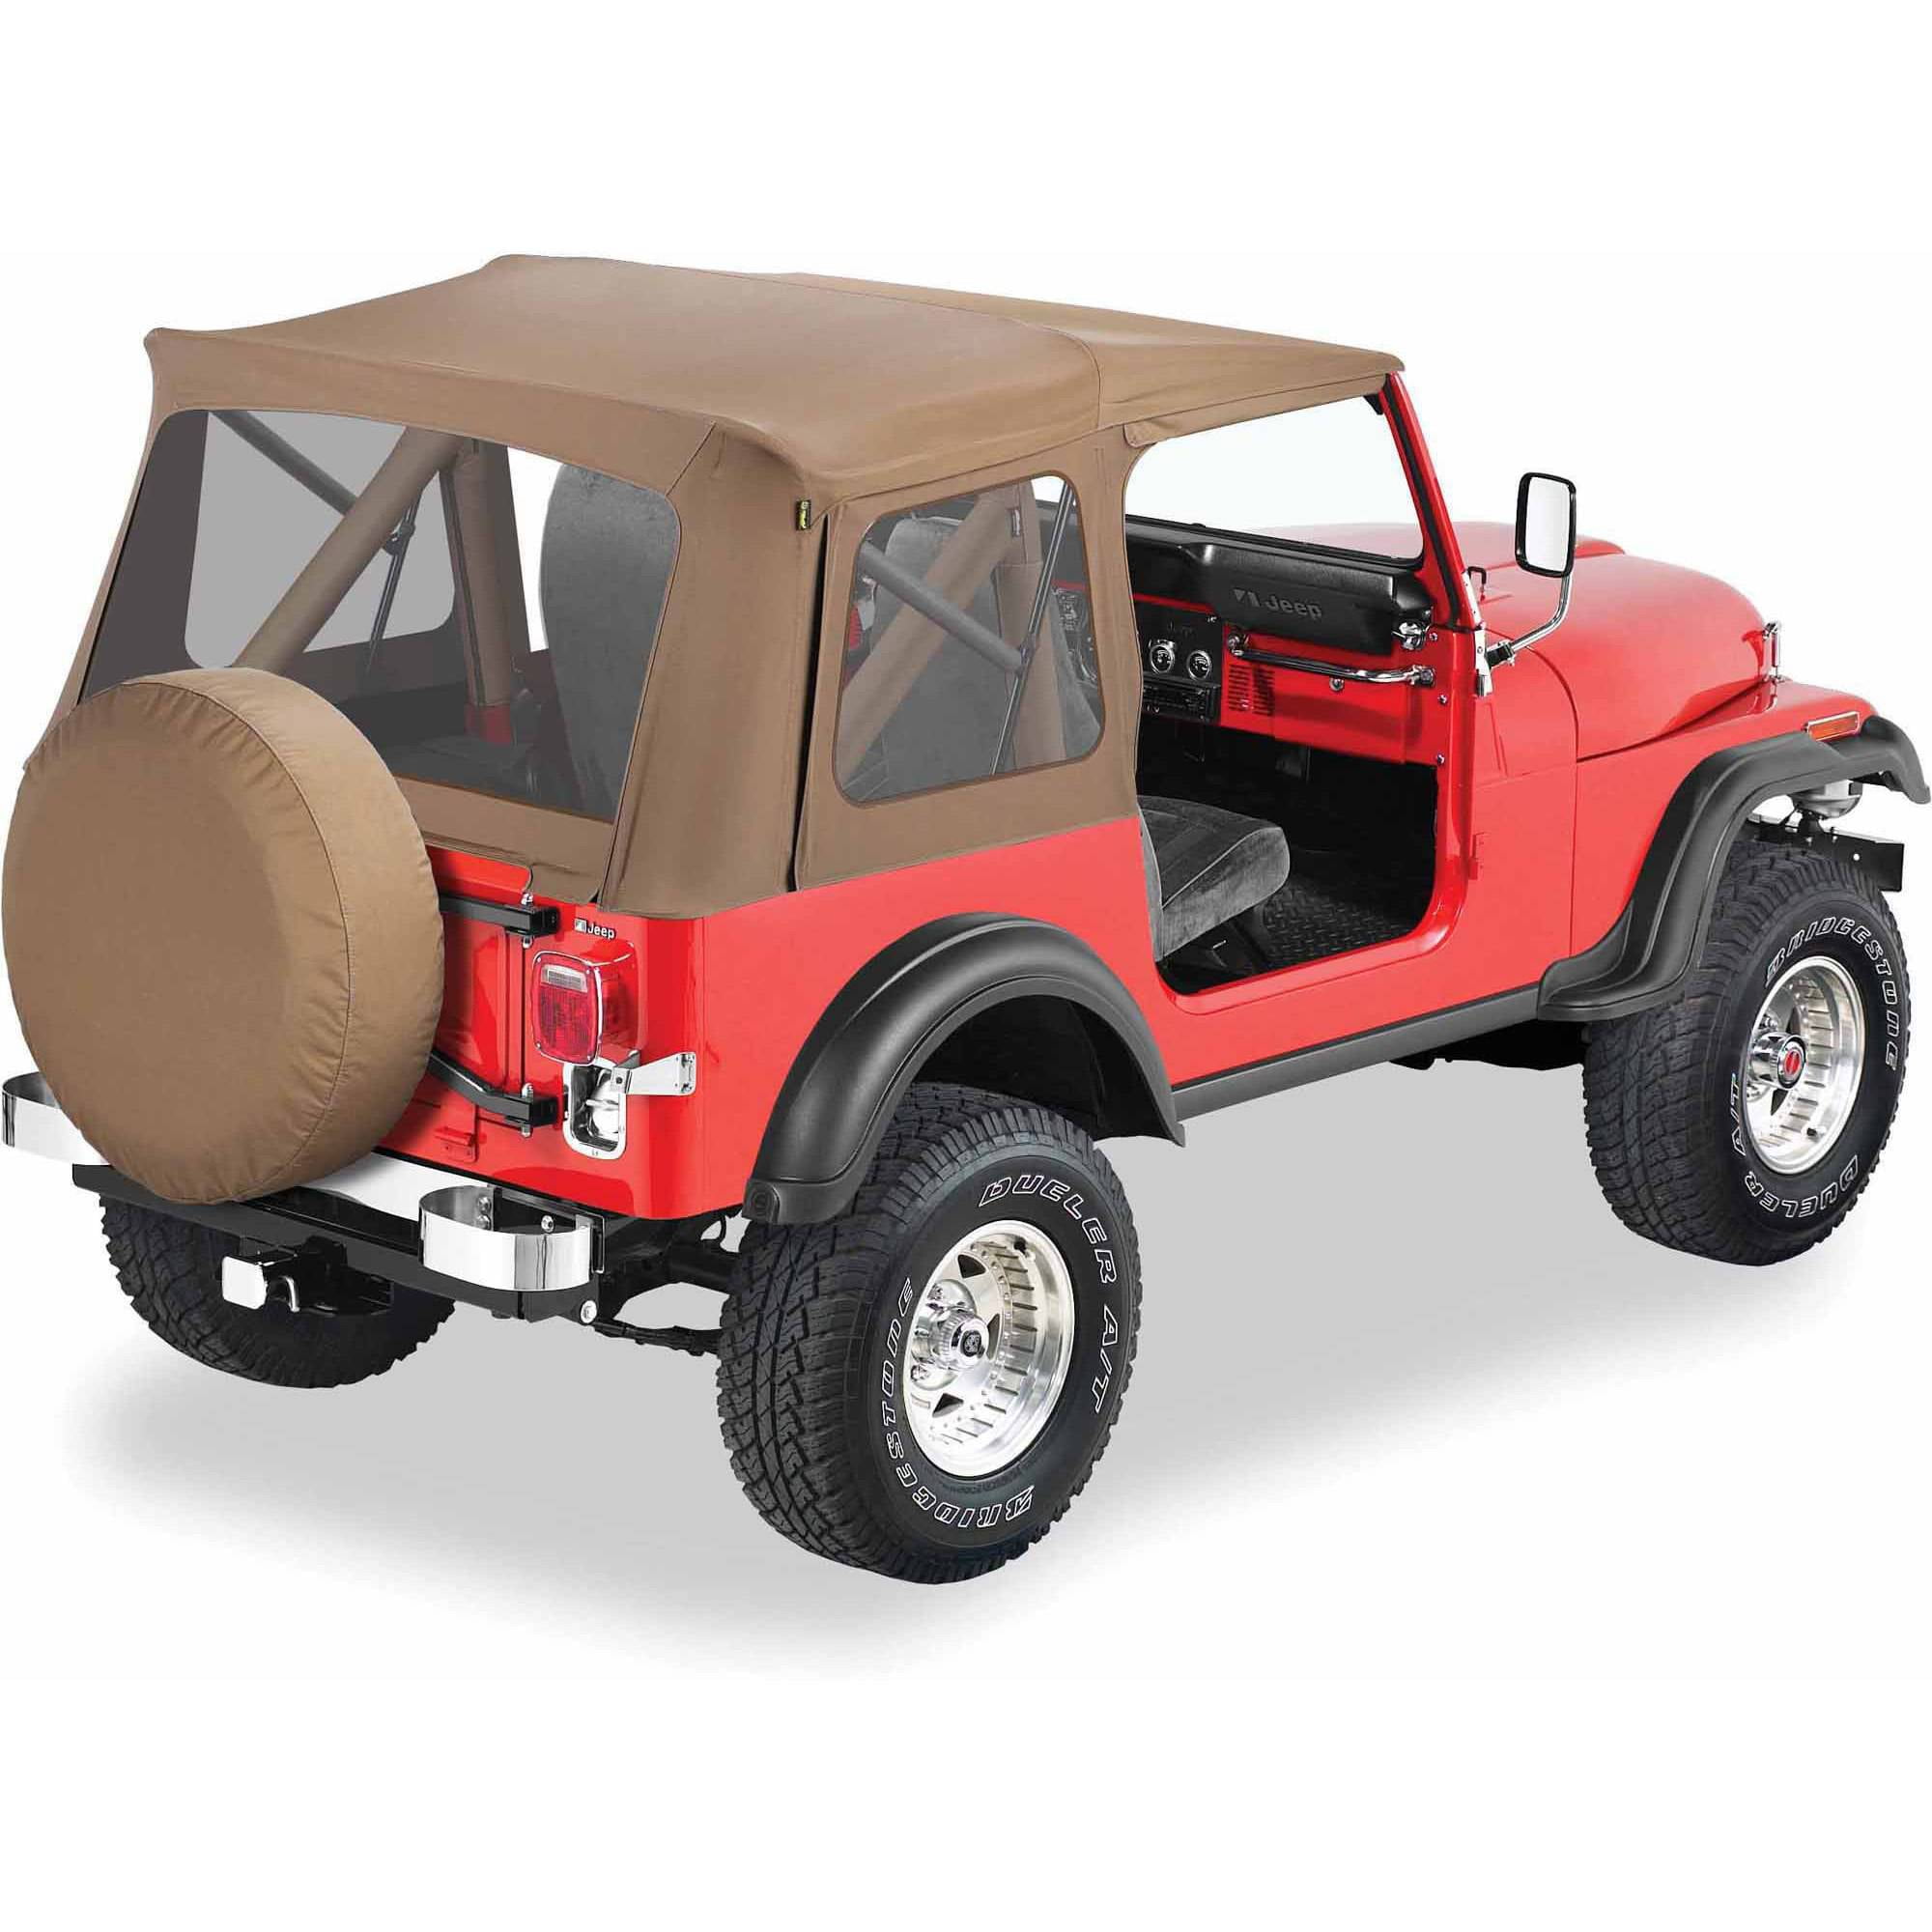 $100 Rebate Available -Bestop 51599-37 Jeep Cj7/Wrangler Supertop Classic  Replacement Top with Clear Windows, Spice 